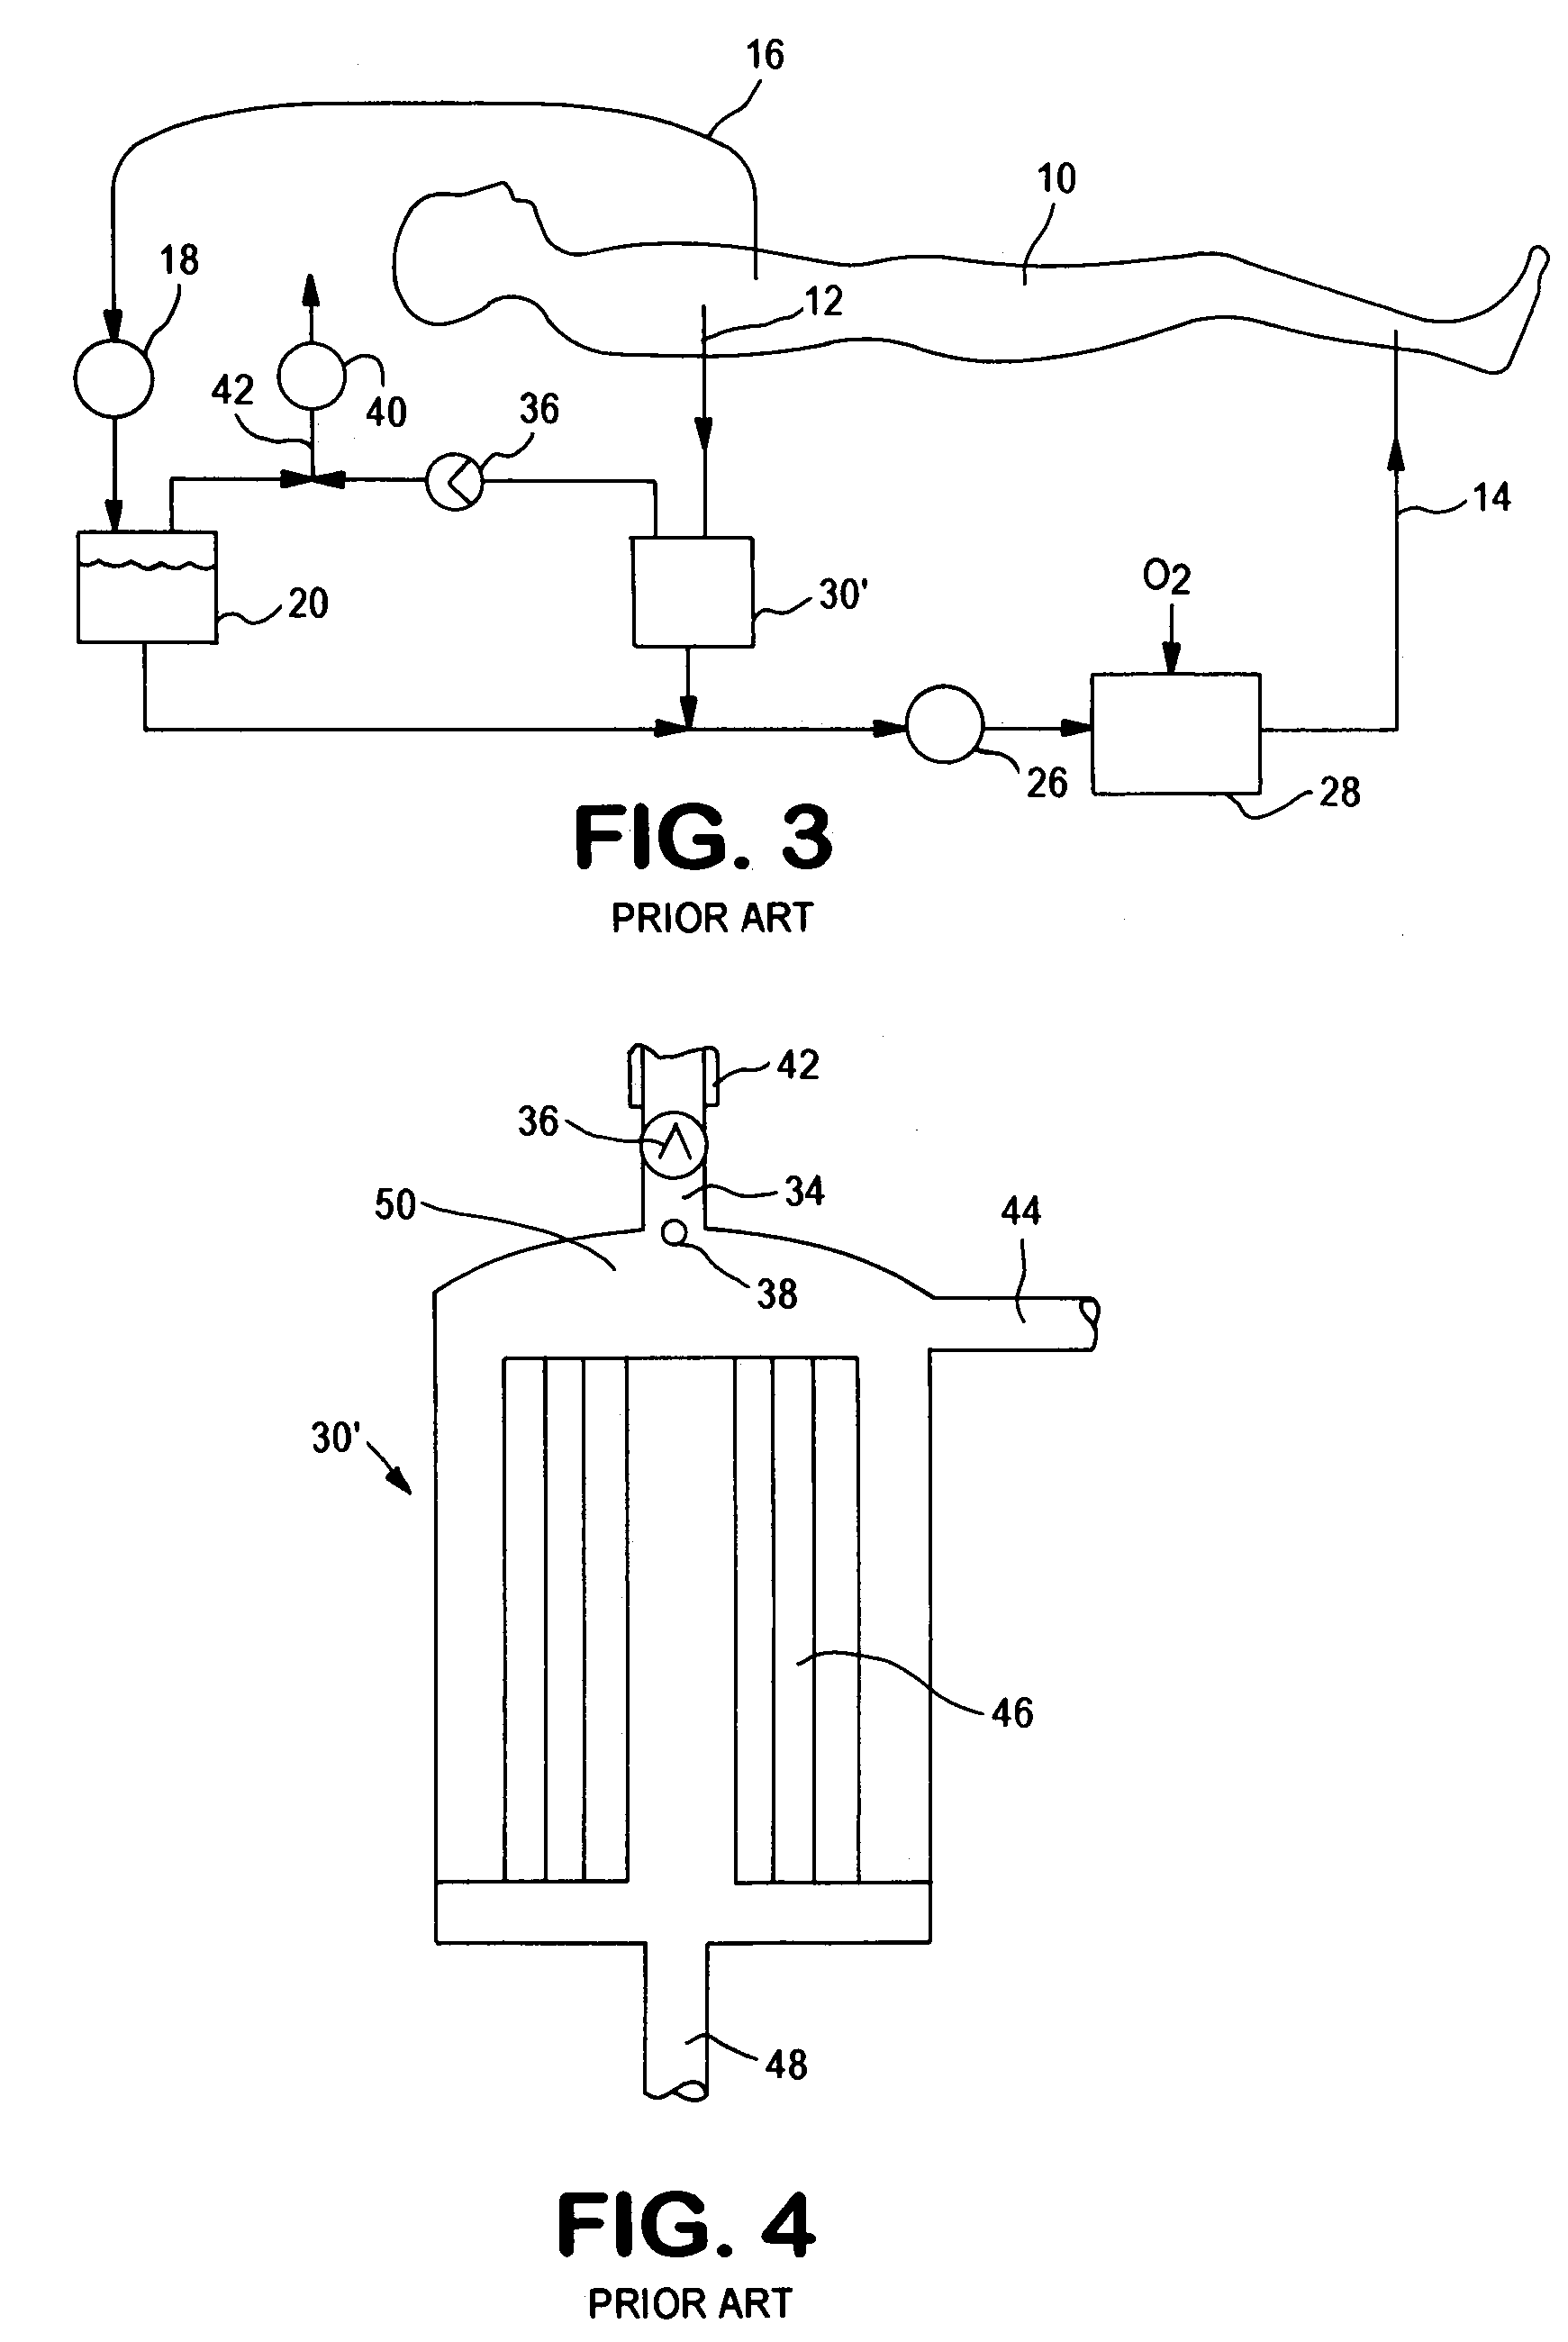 Extracorporeal blood circuit air removal system and method